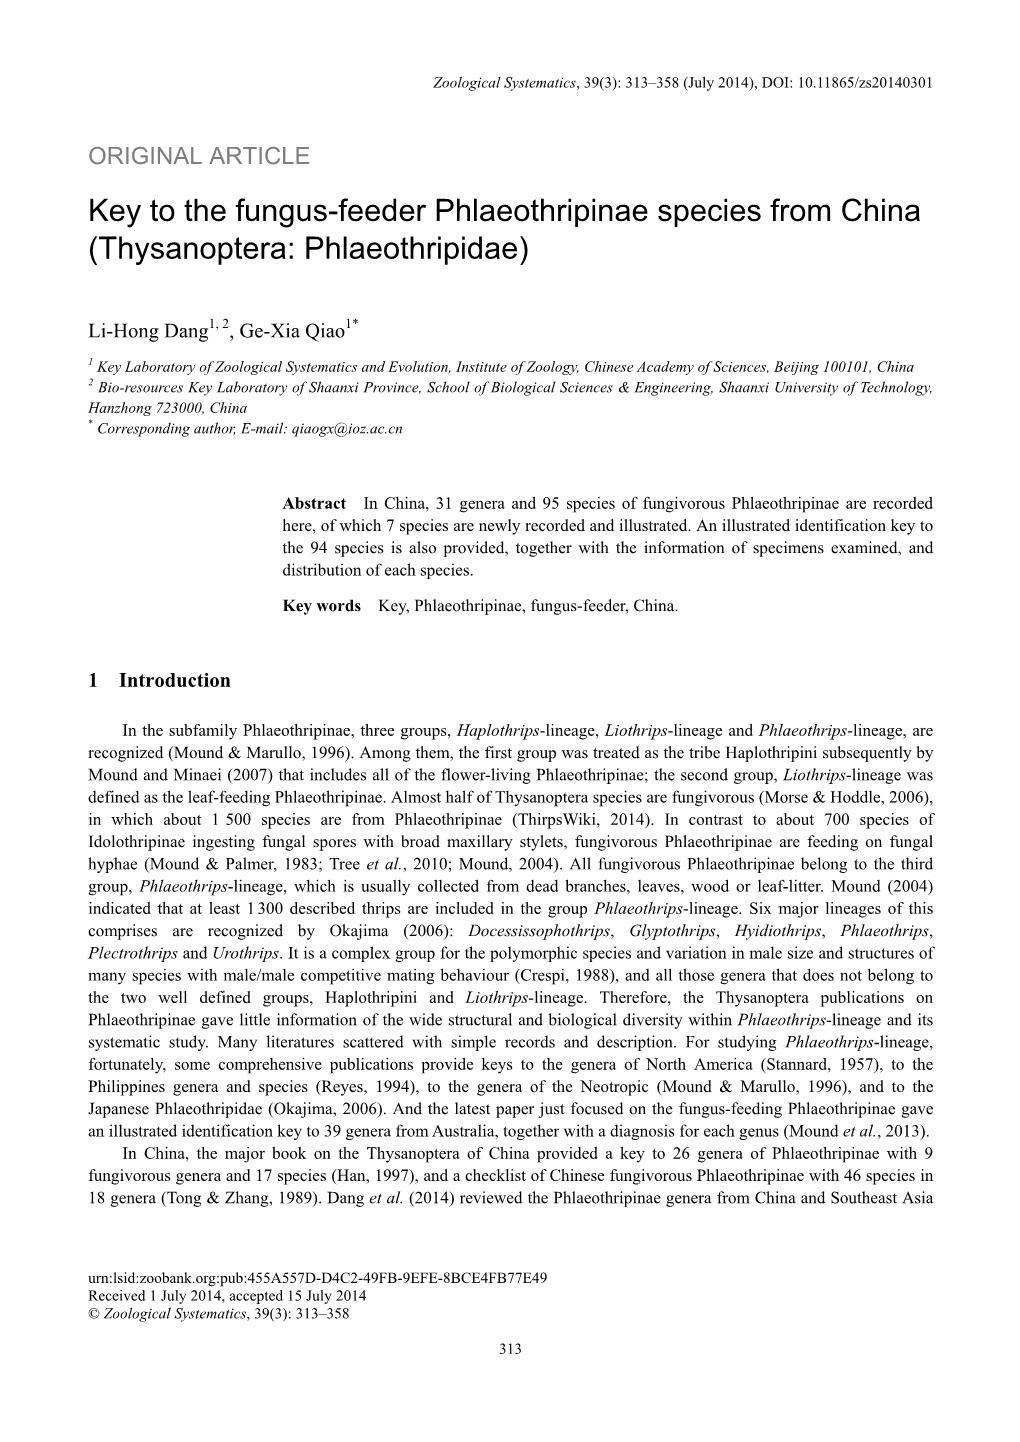 Key to the Fungus-Feeder Phlaeothripinae Species from China (Thysanoptera: Phlaeothripidae)